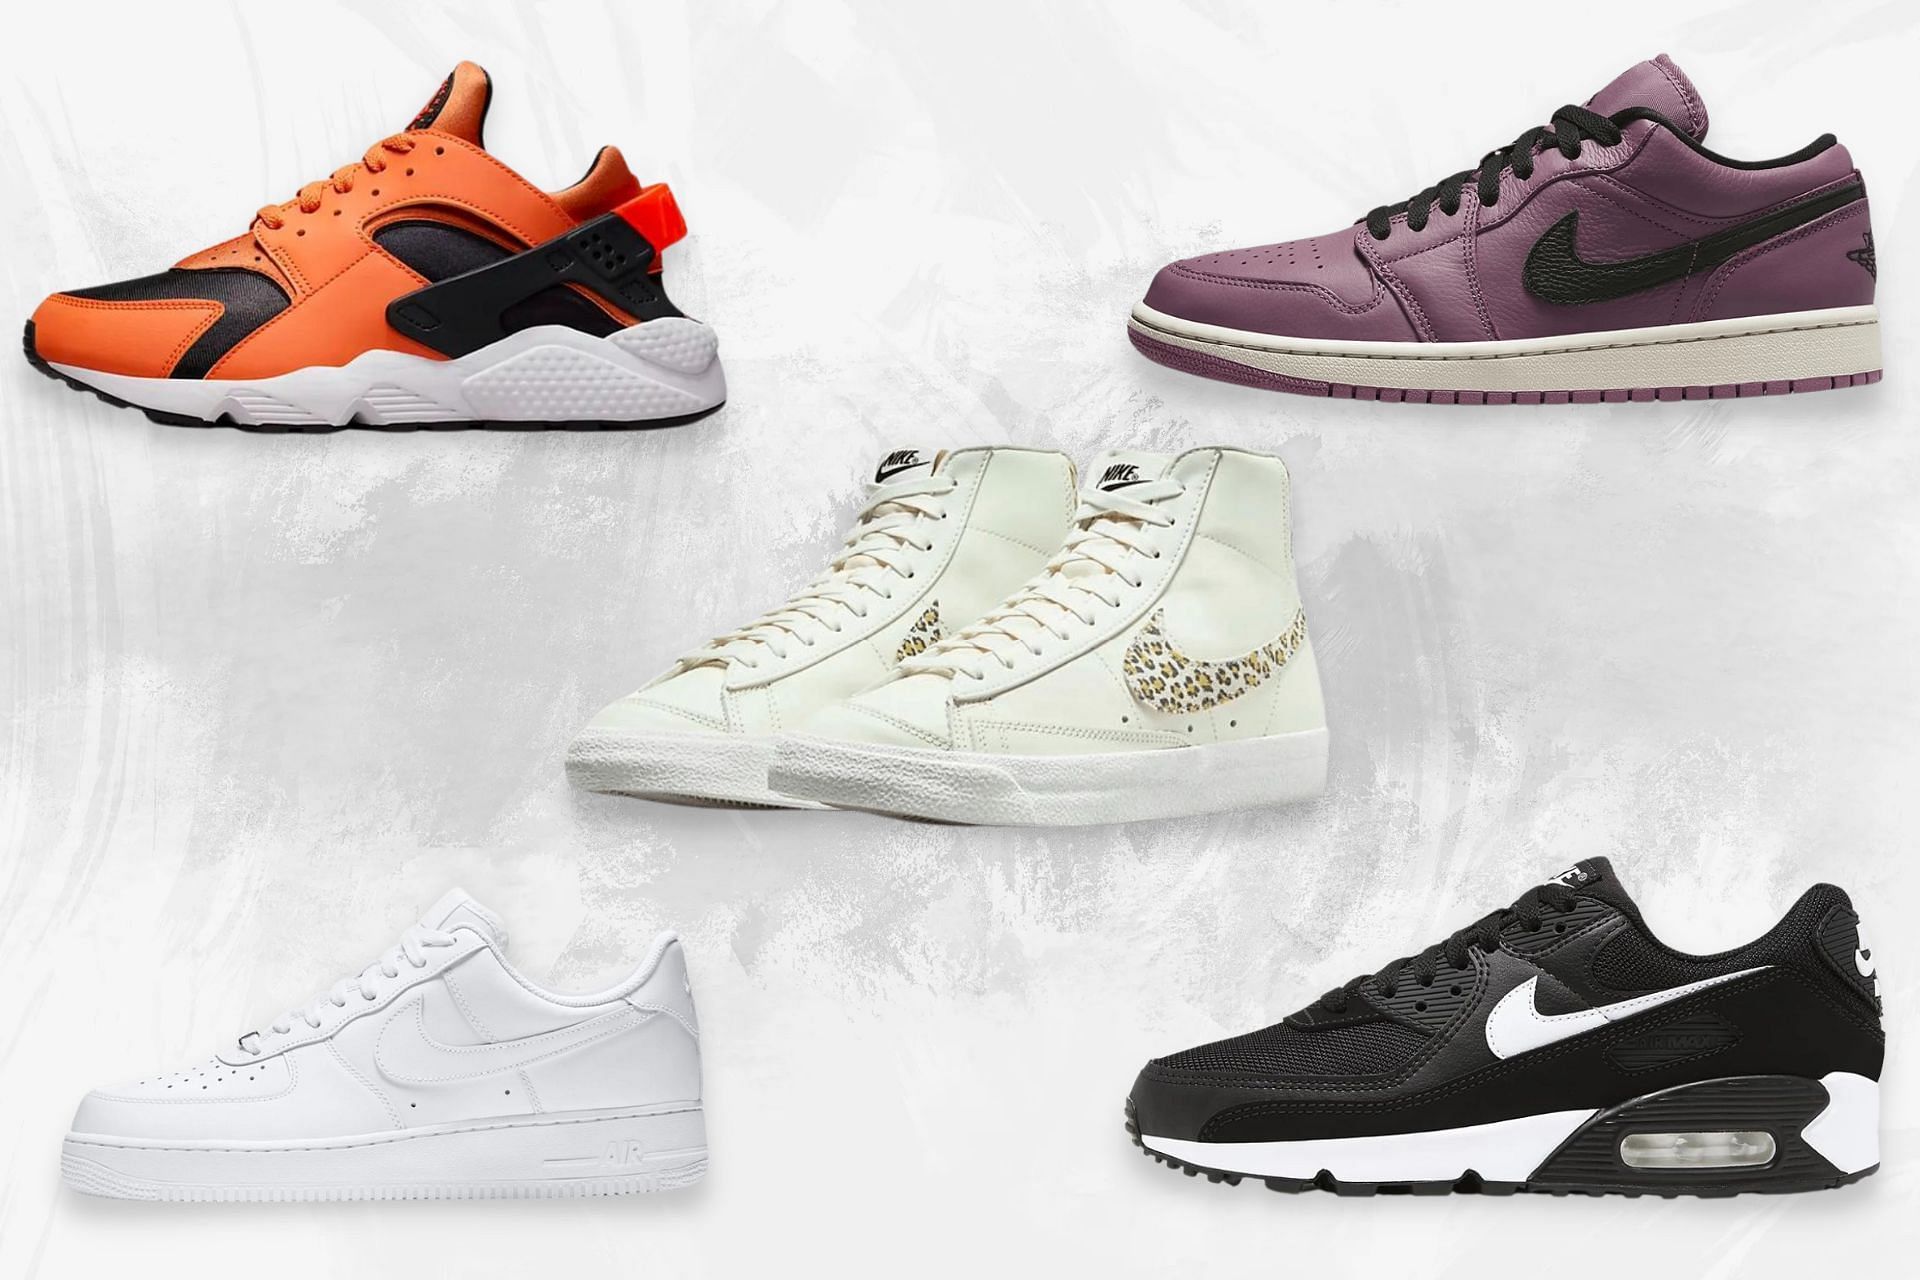 Top 5 Nike sneakers of all time